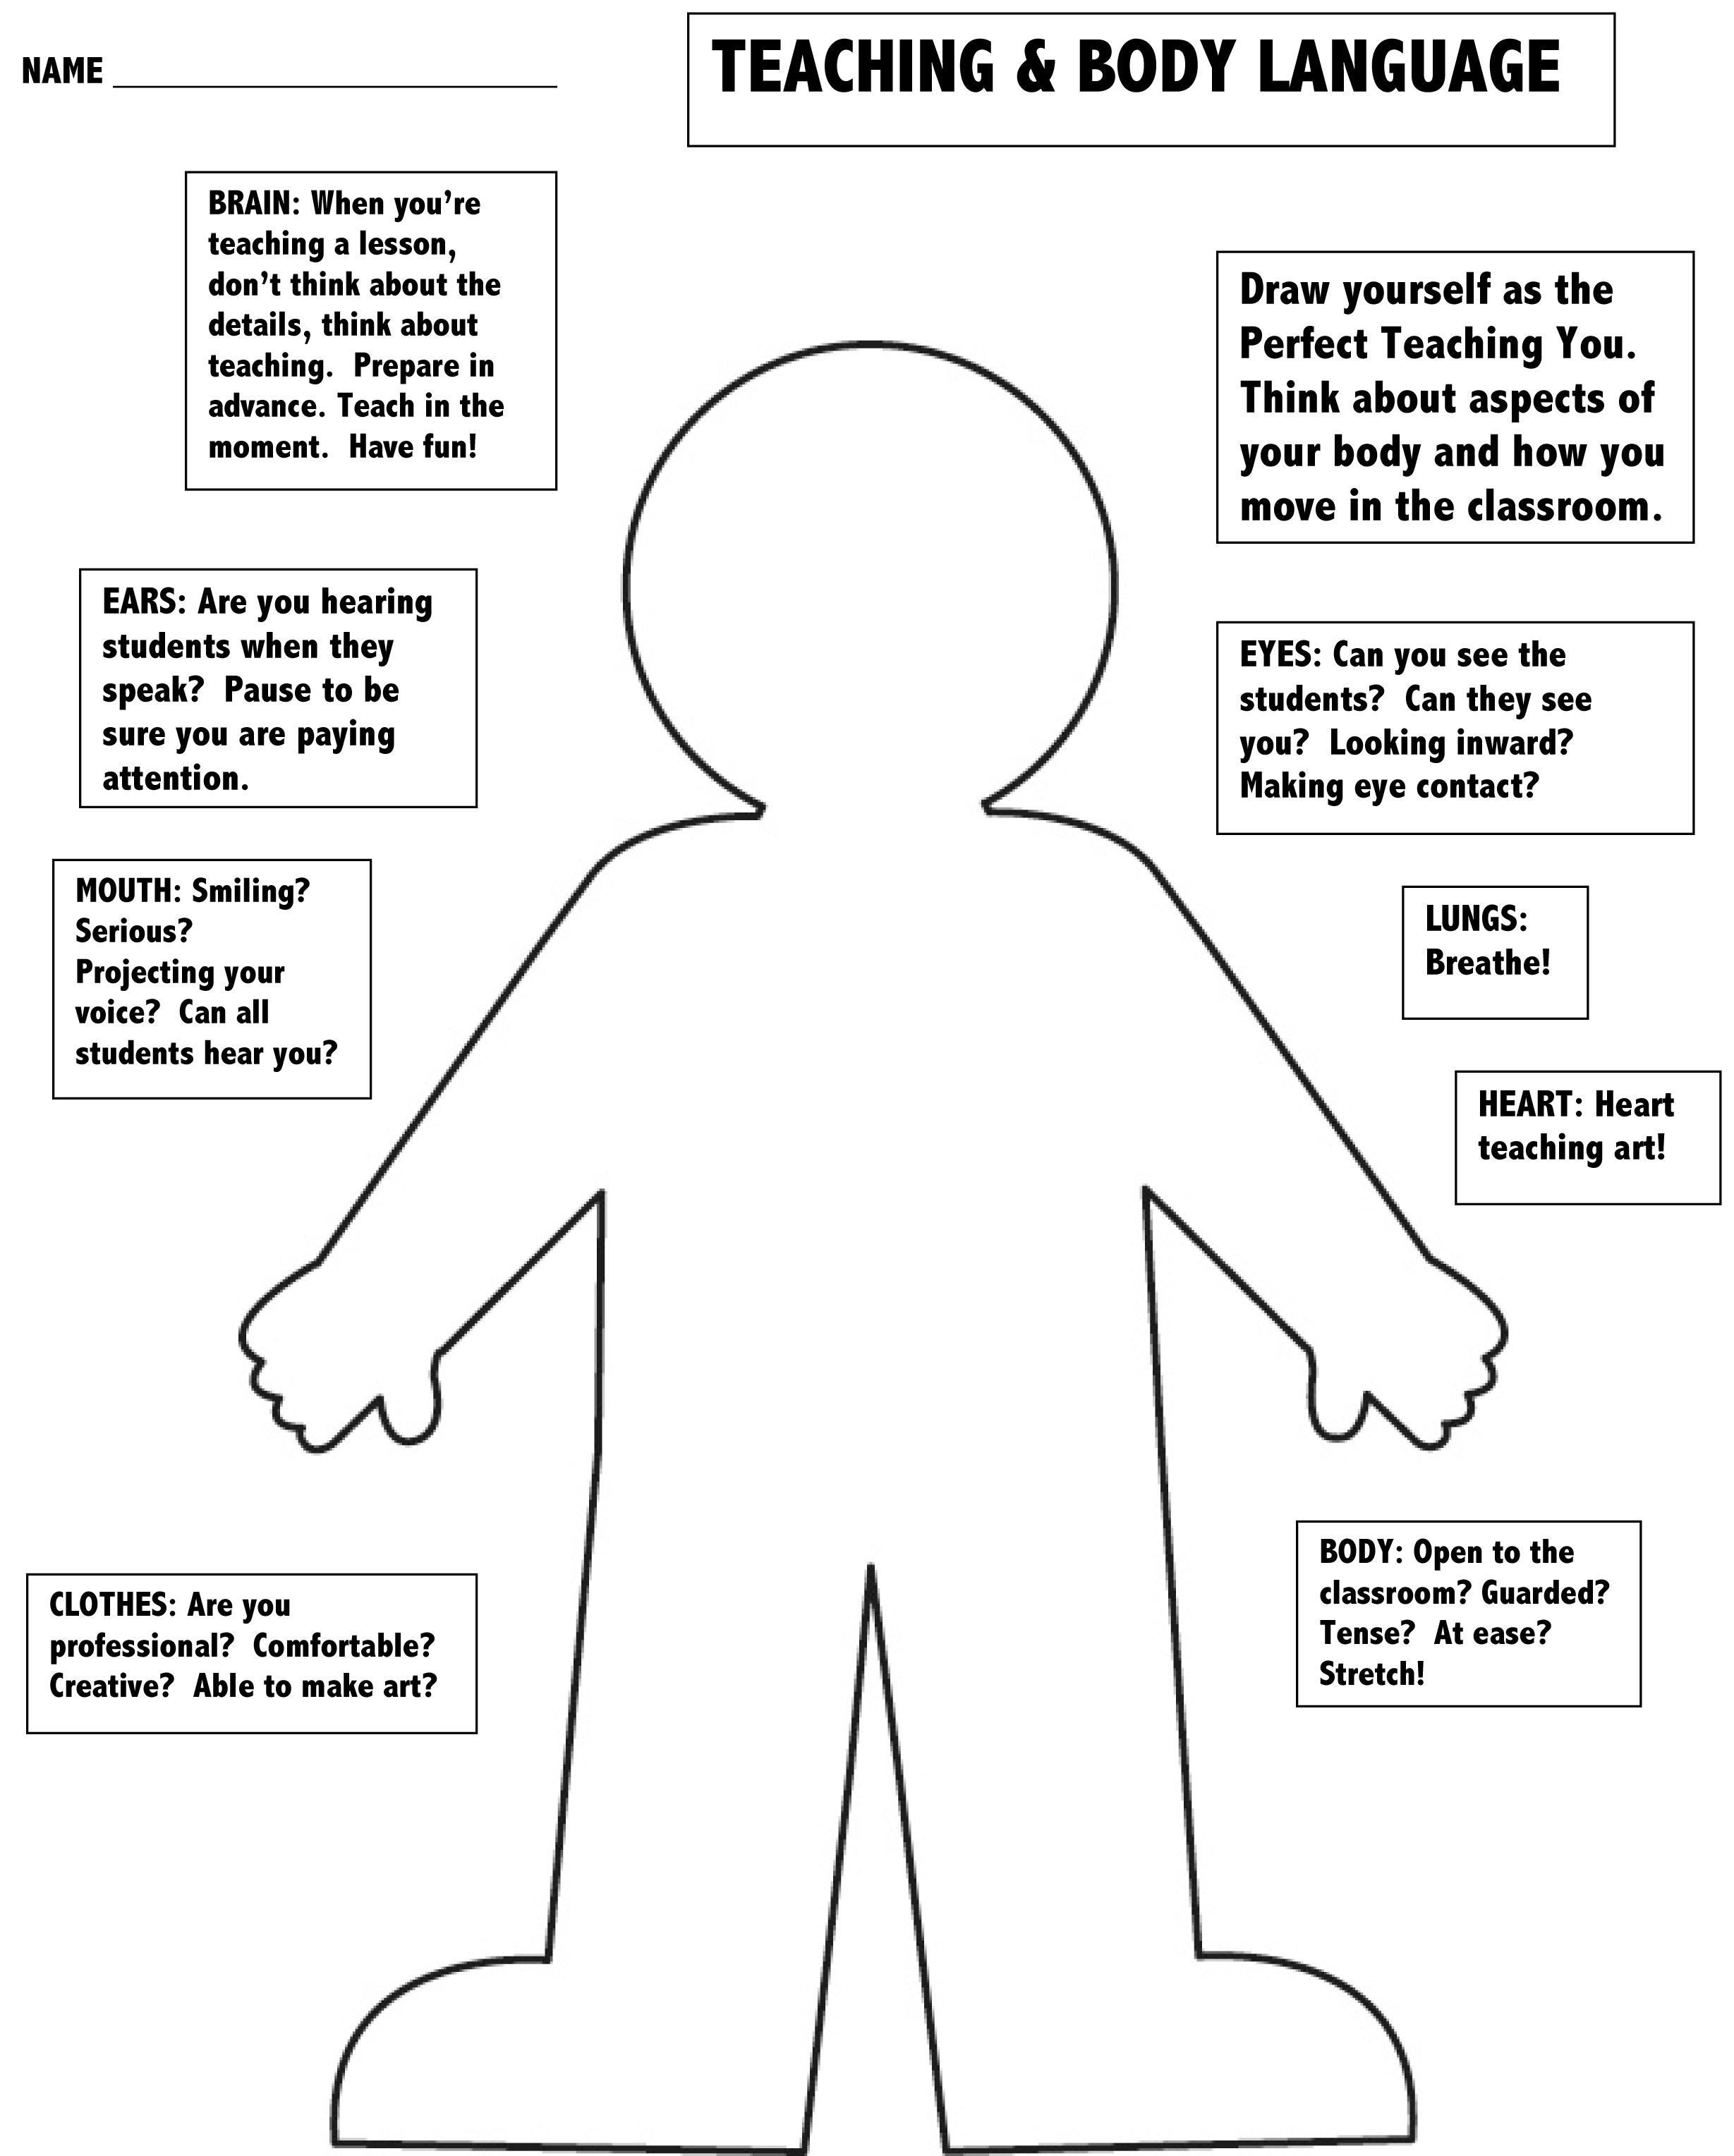 15 Best Images of Personal Space Worksheets - Body Language Worksheets